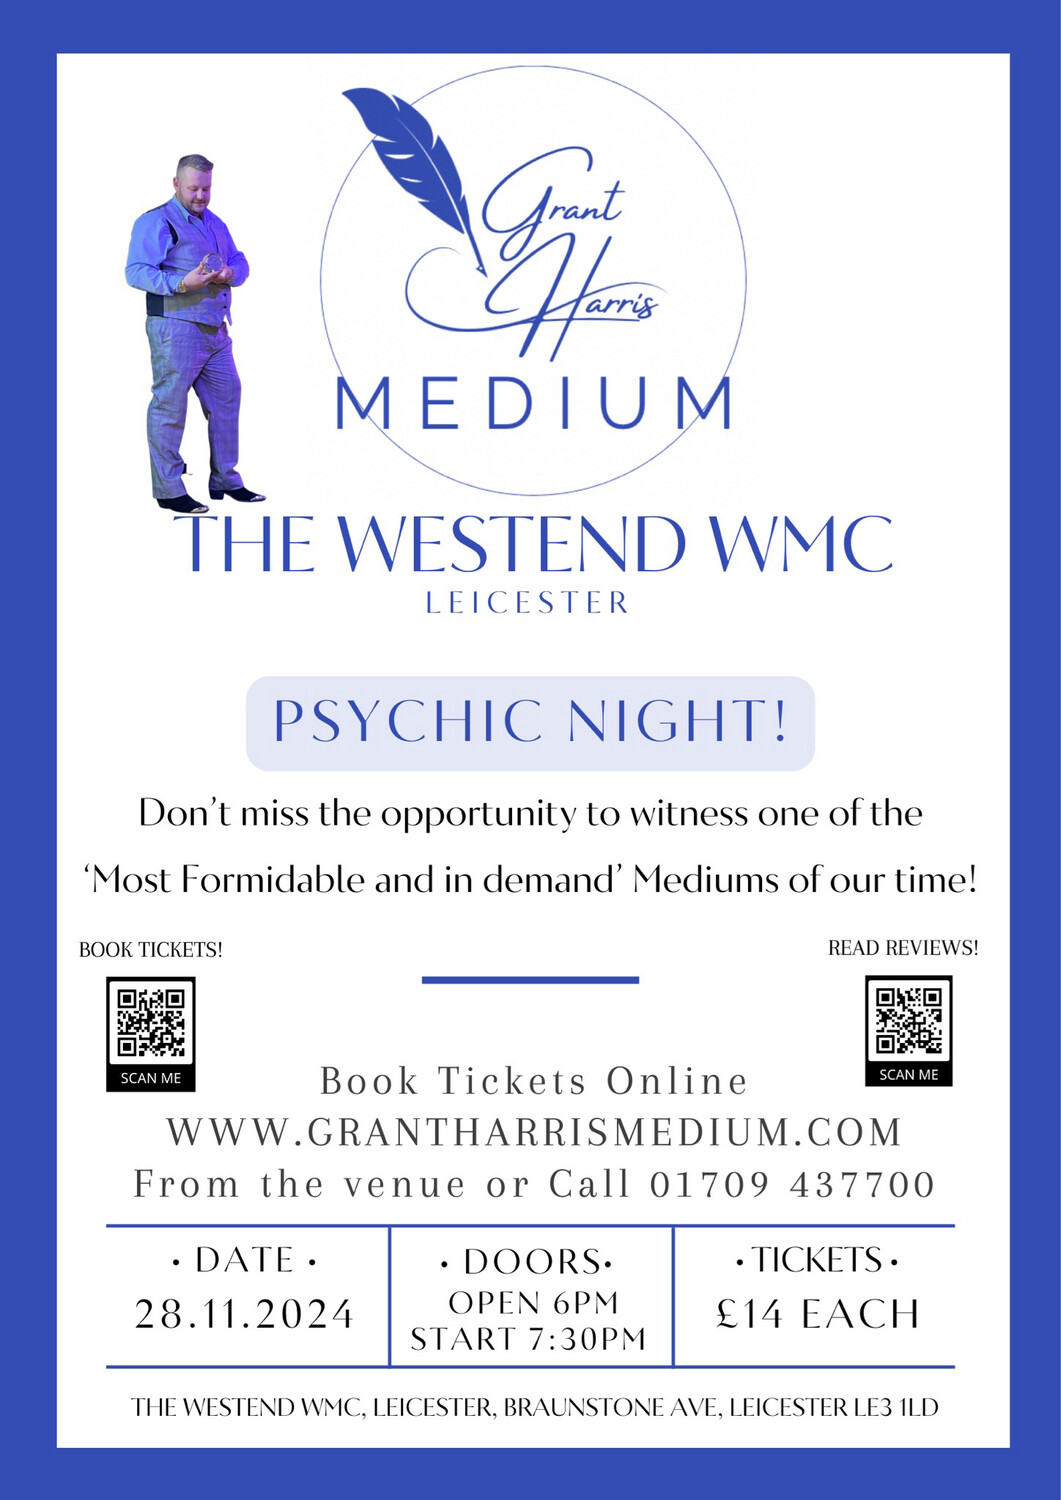 Psychic Night | The Westend WMC, Leicester, Thu 28th November 2024